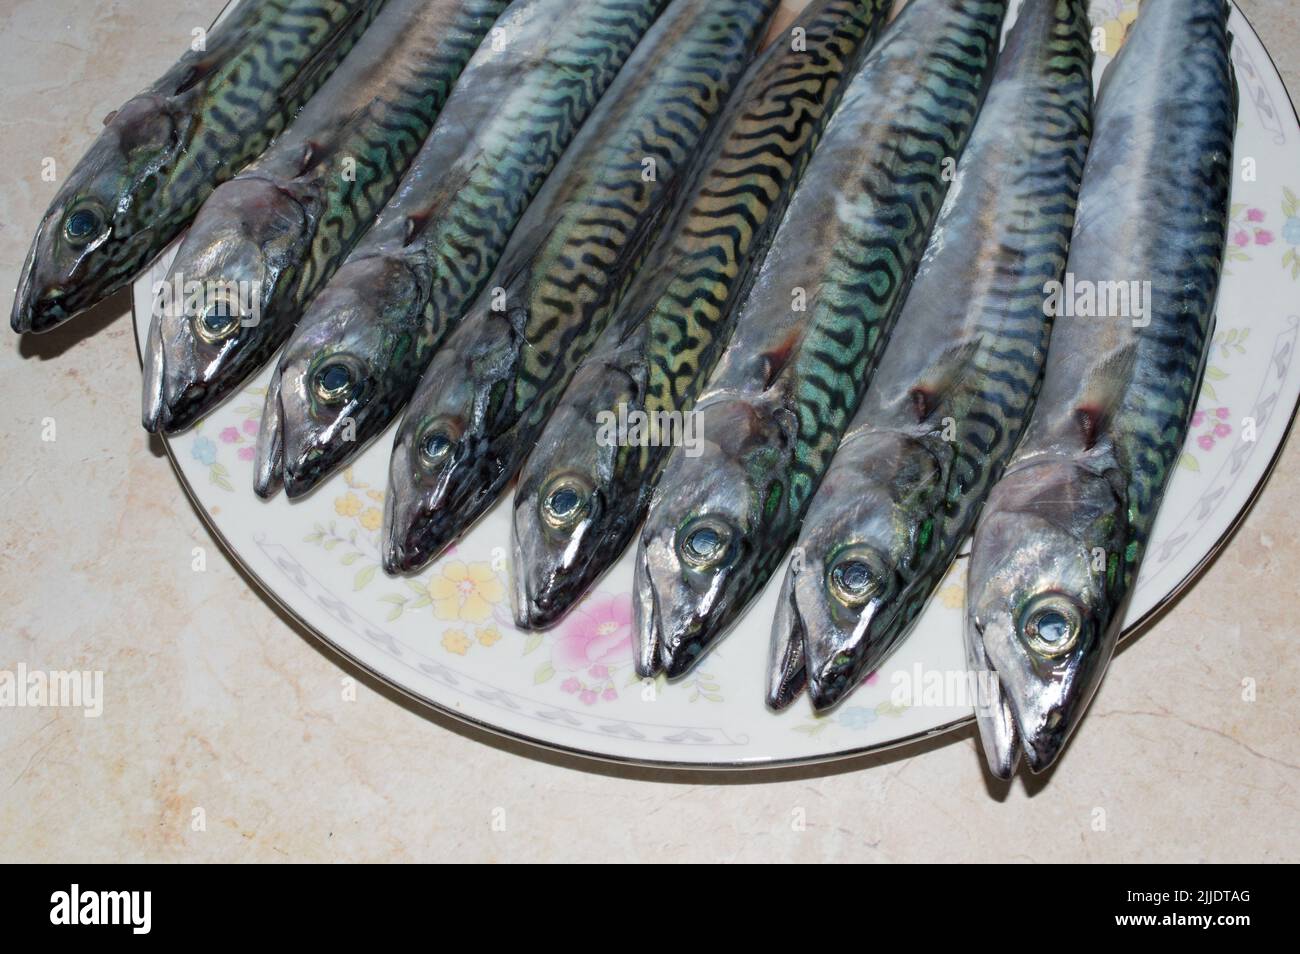 Raw saltwater fish Atlantic mackerel, Scomber scombrus on a white plate, raw seafood from Adriatic sea, Dalmatian cuisine Stock Photo